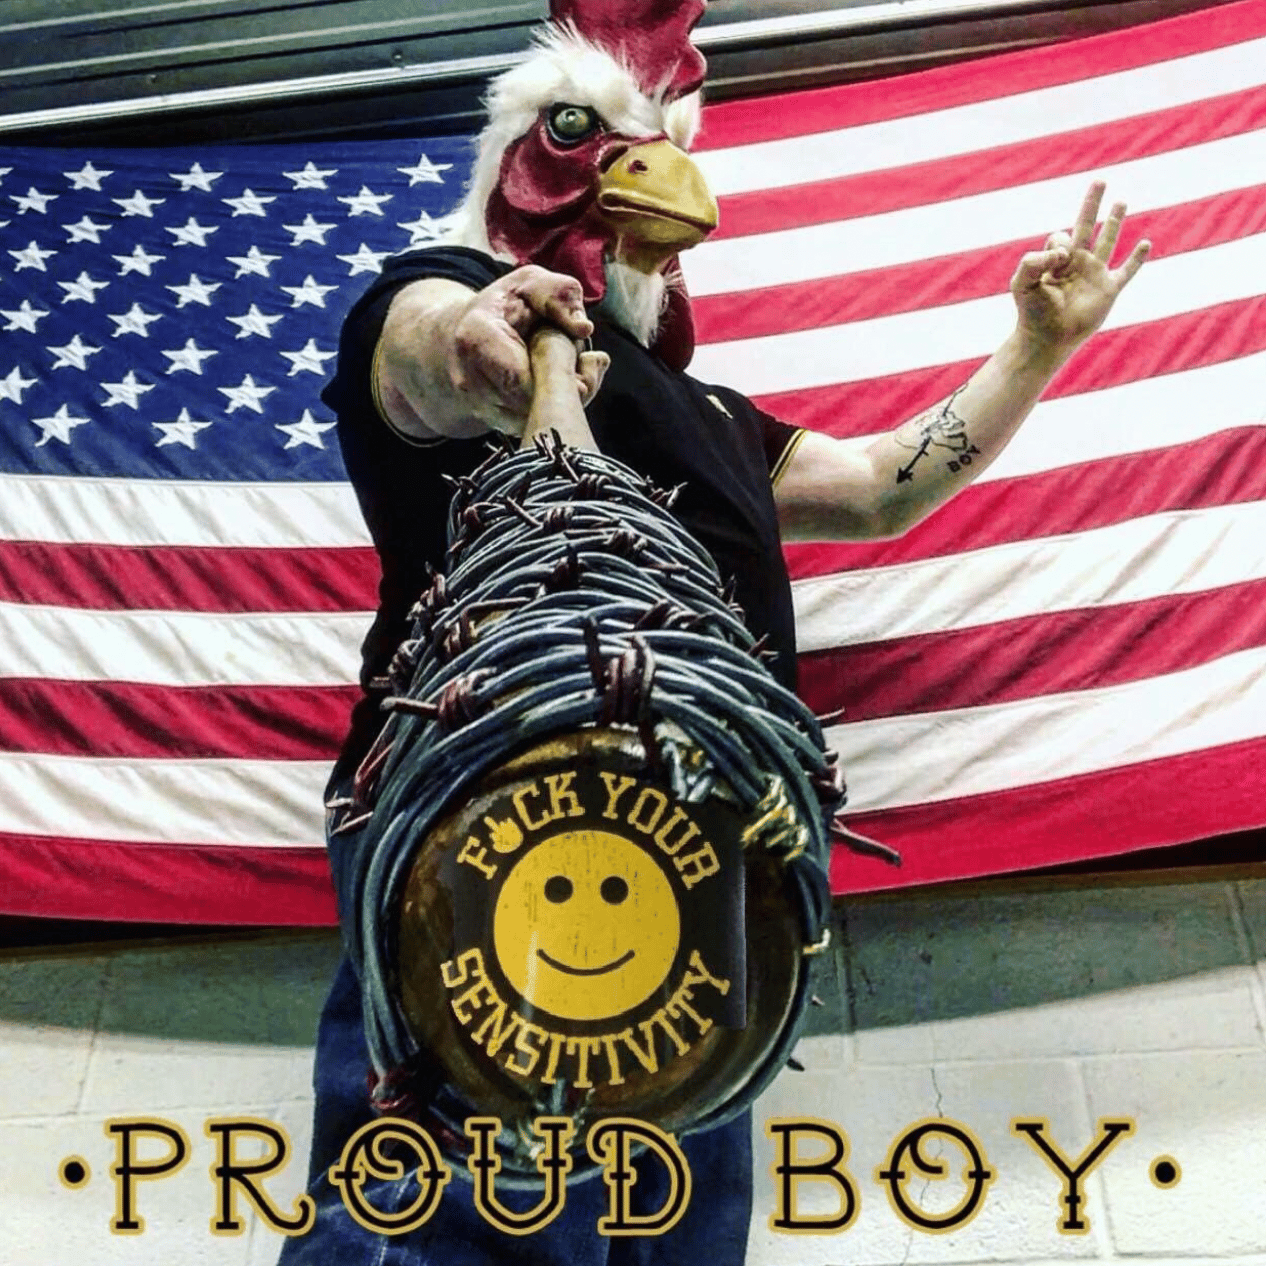 Proud Boys Circulate Photo Proud Boy in Rooster Mask With Baseball Bat Wrapped in Barbed Wire